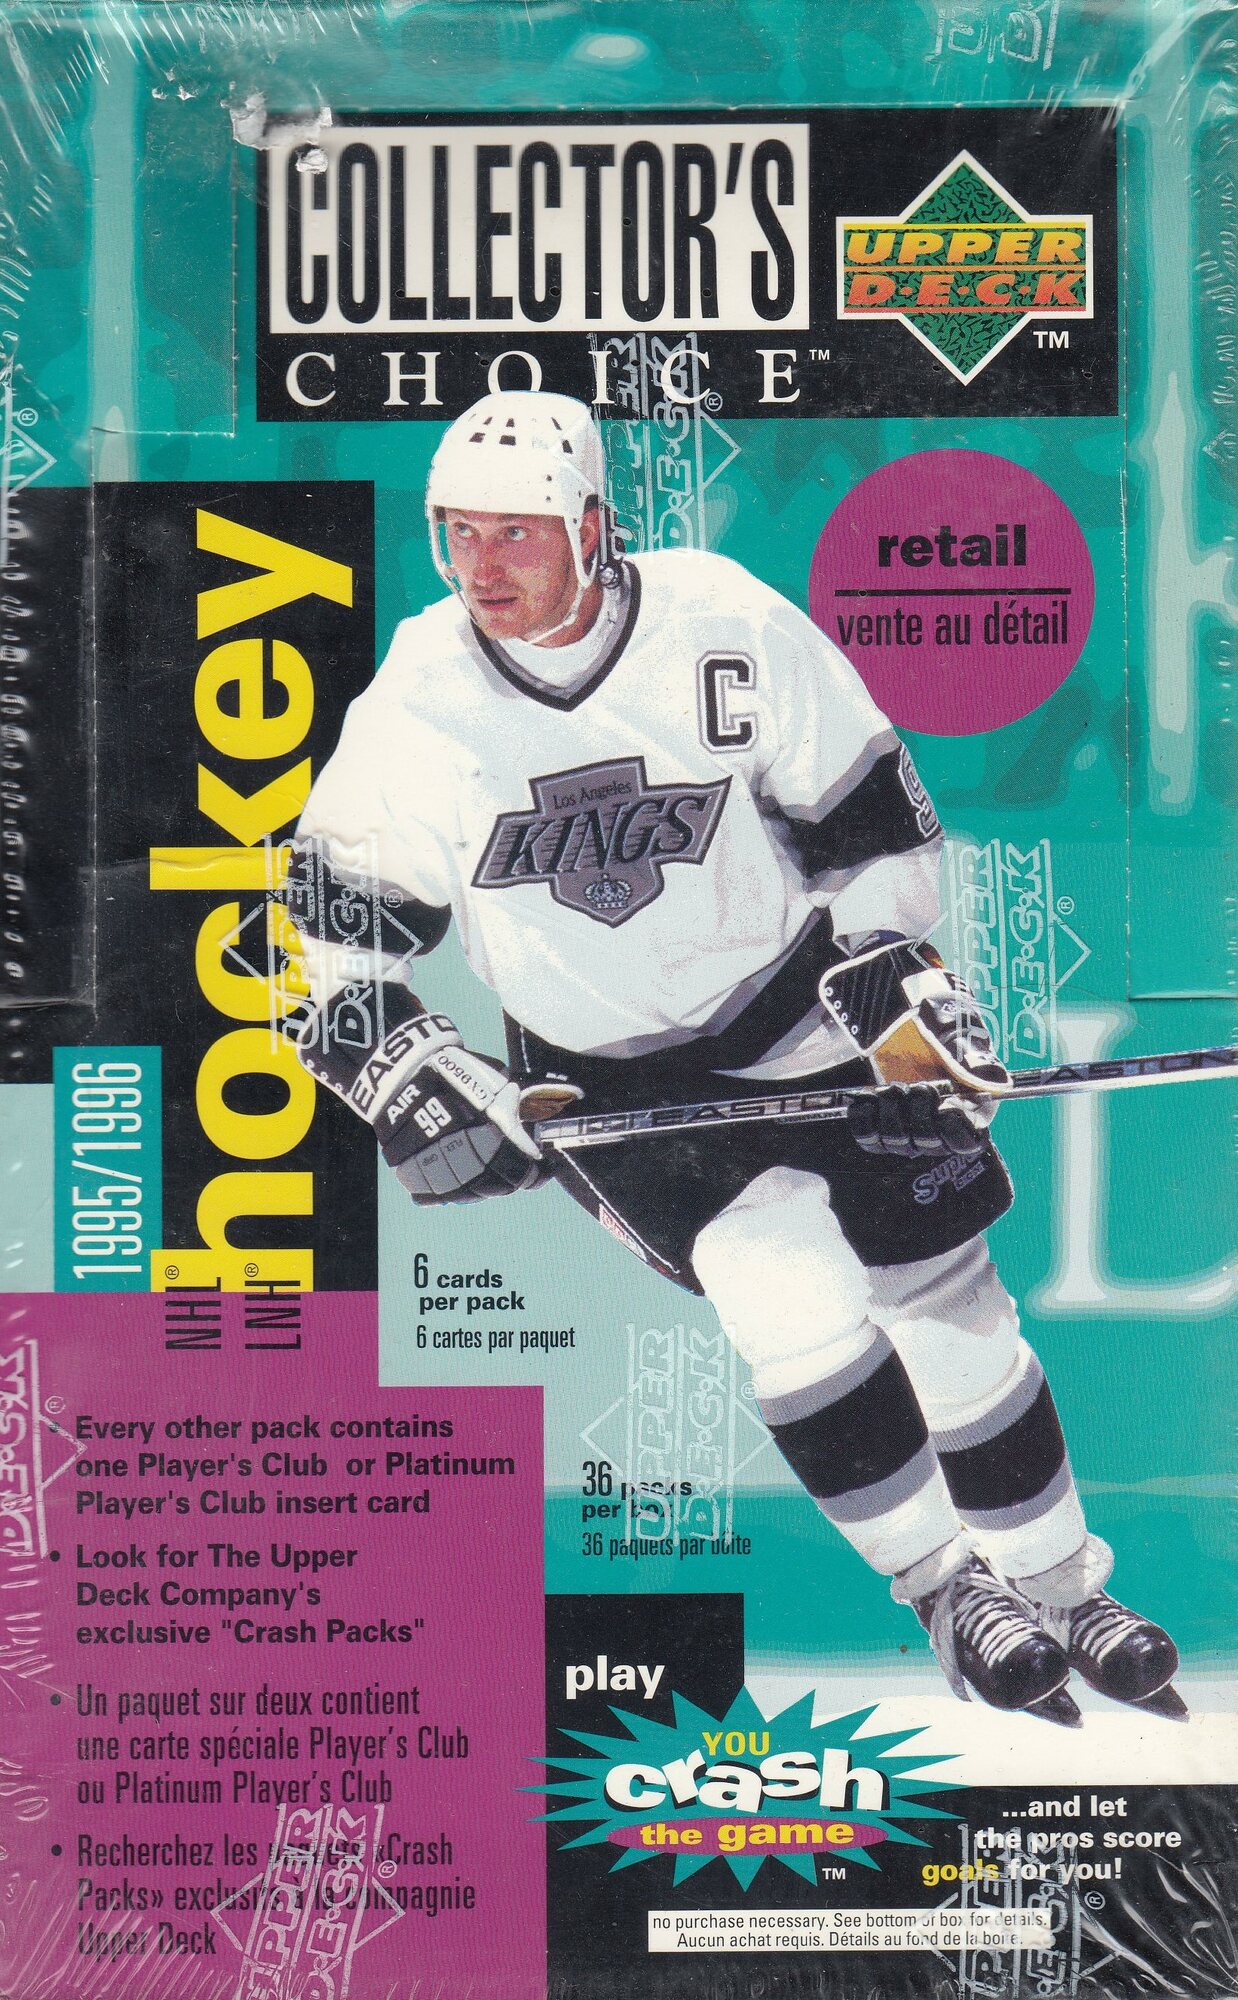 When rookie Jeremy Roenick went up against Marty McSorley, with